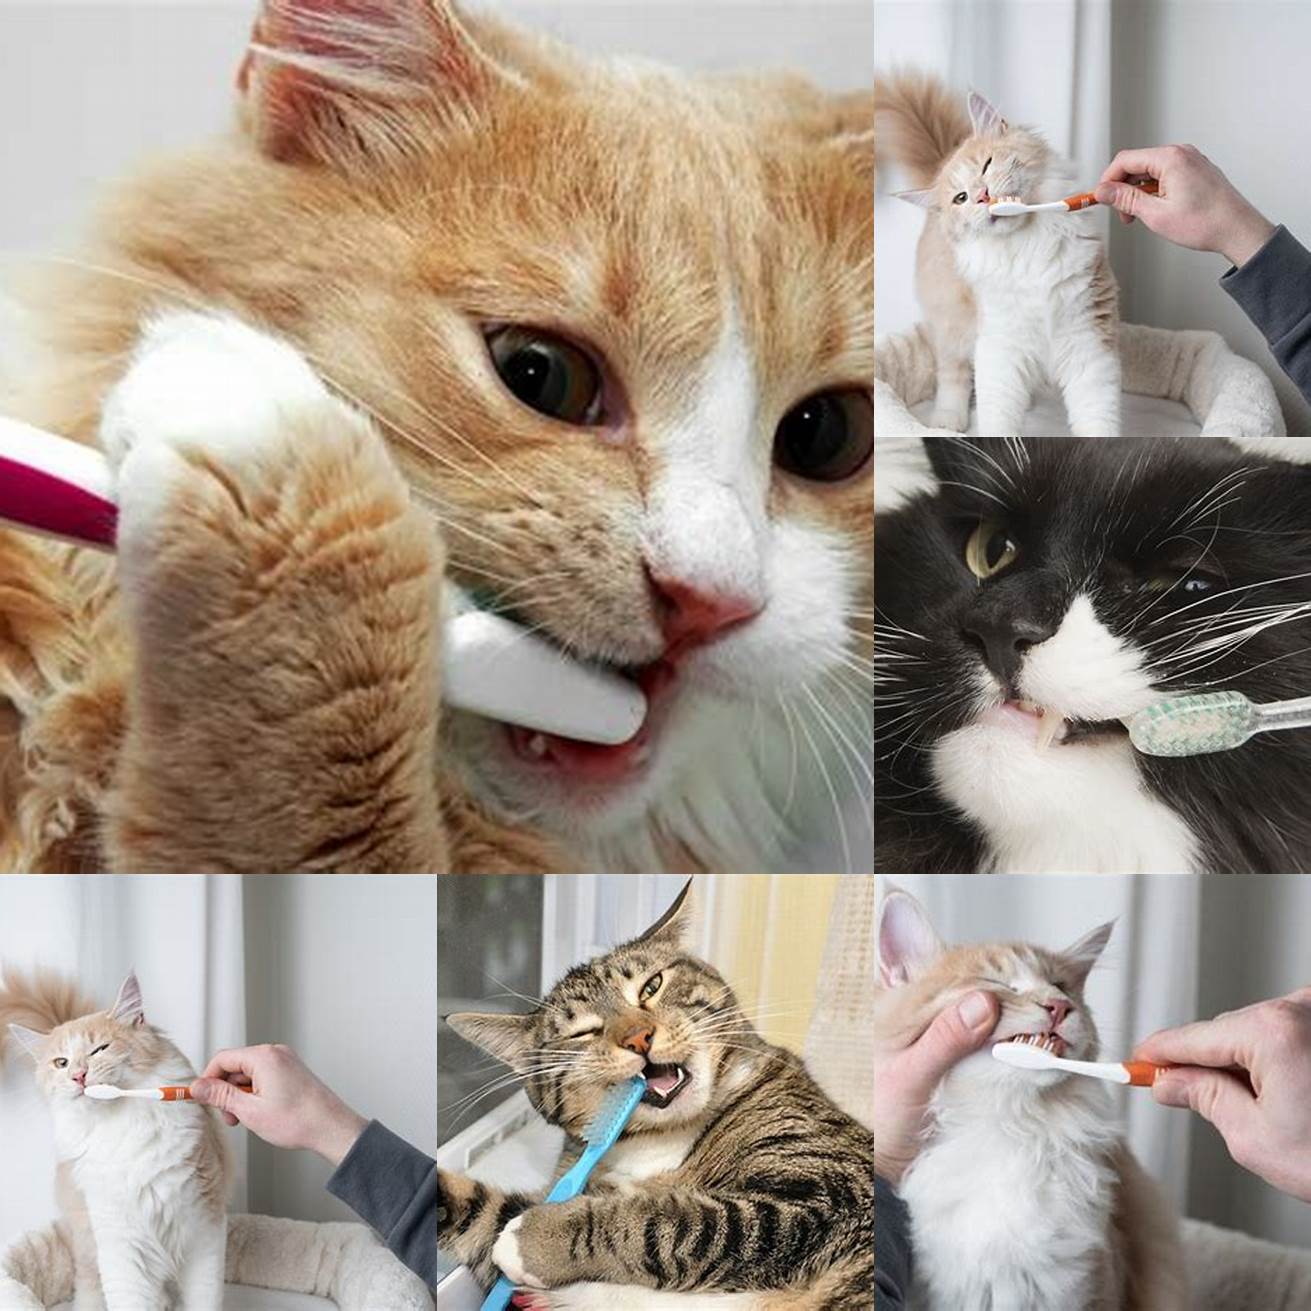 Brush your cats teeth